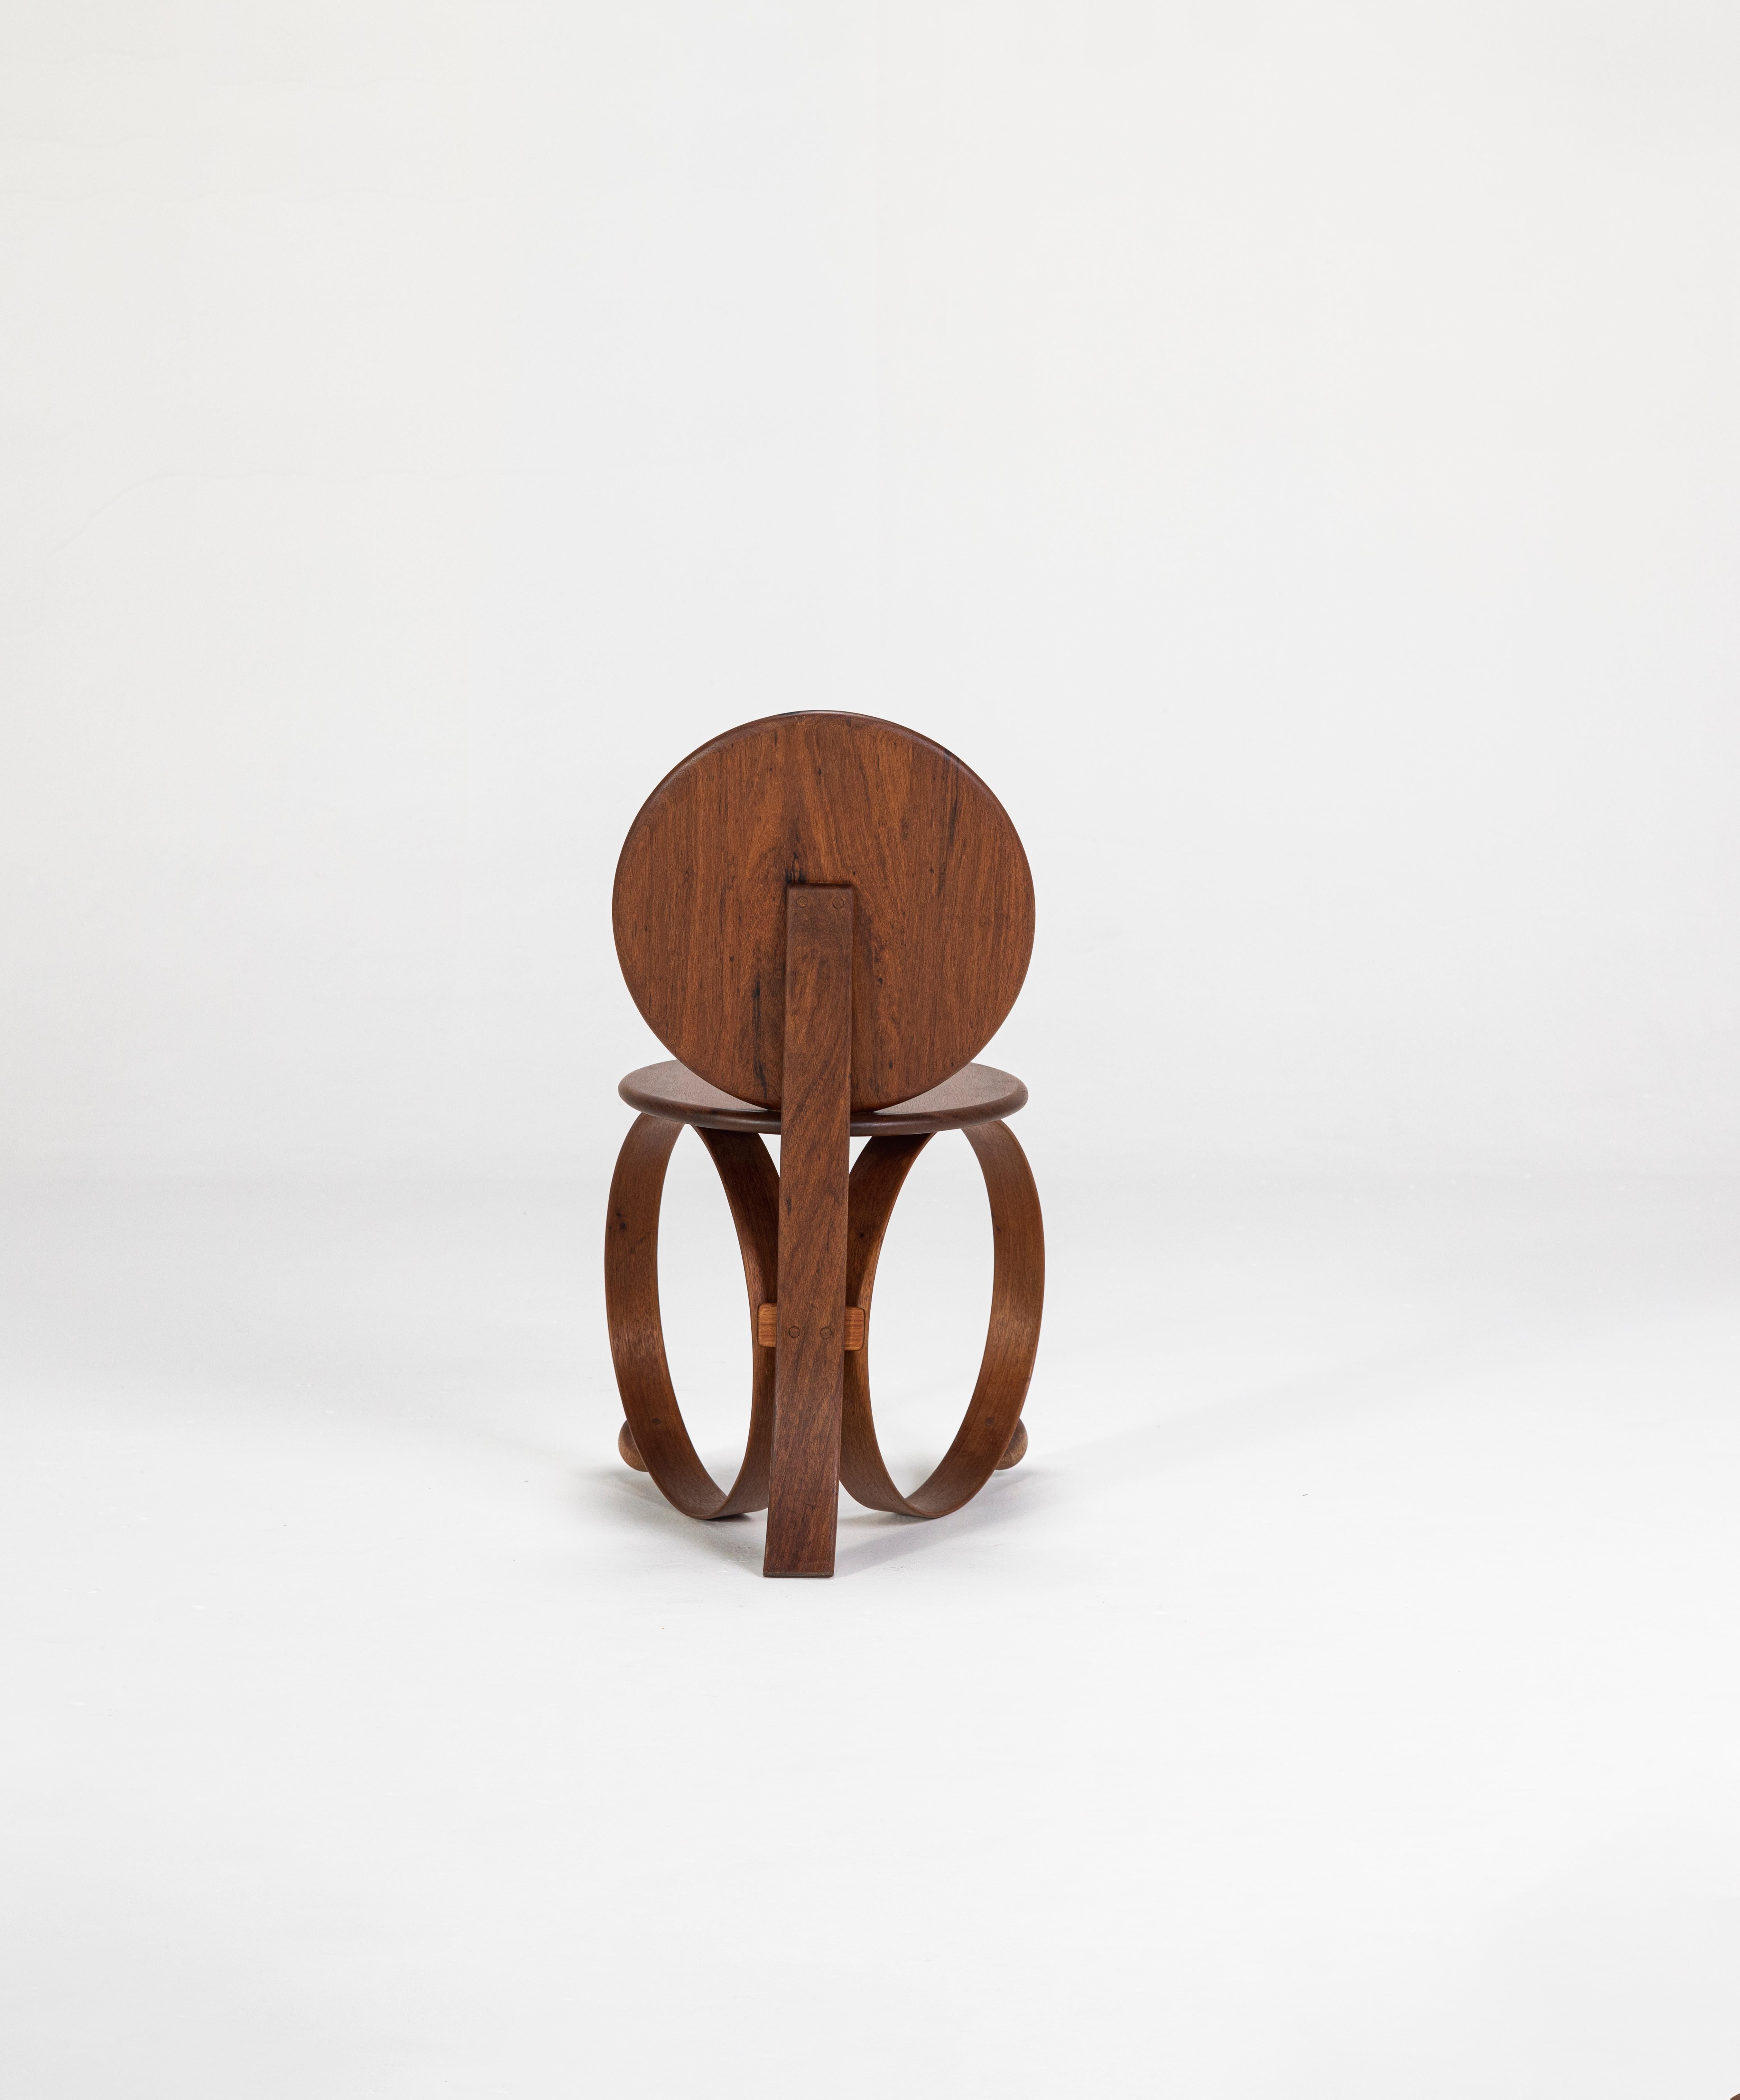 Dedicated to Yara, the chair began with the experimenting with different ways of working the solid wood in the studio. The circular legs and the back leg were made of solid steambent wood. In this technique, the pieces are submerged in water for two